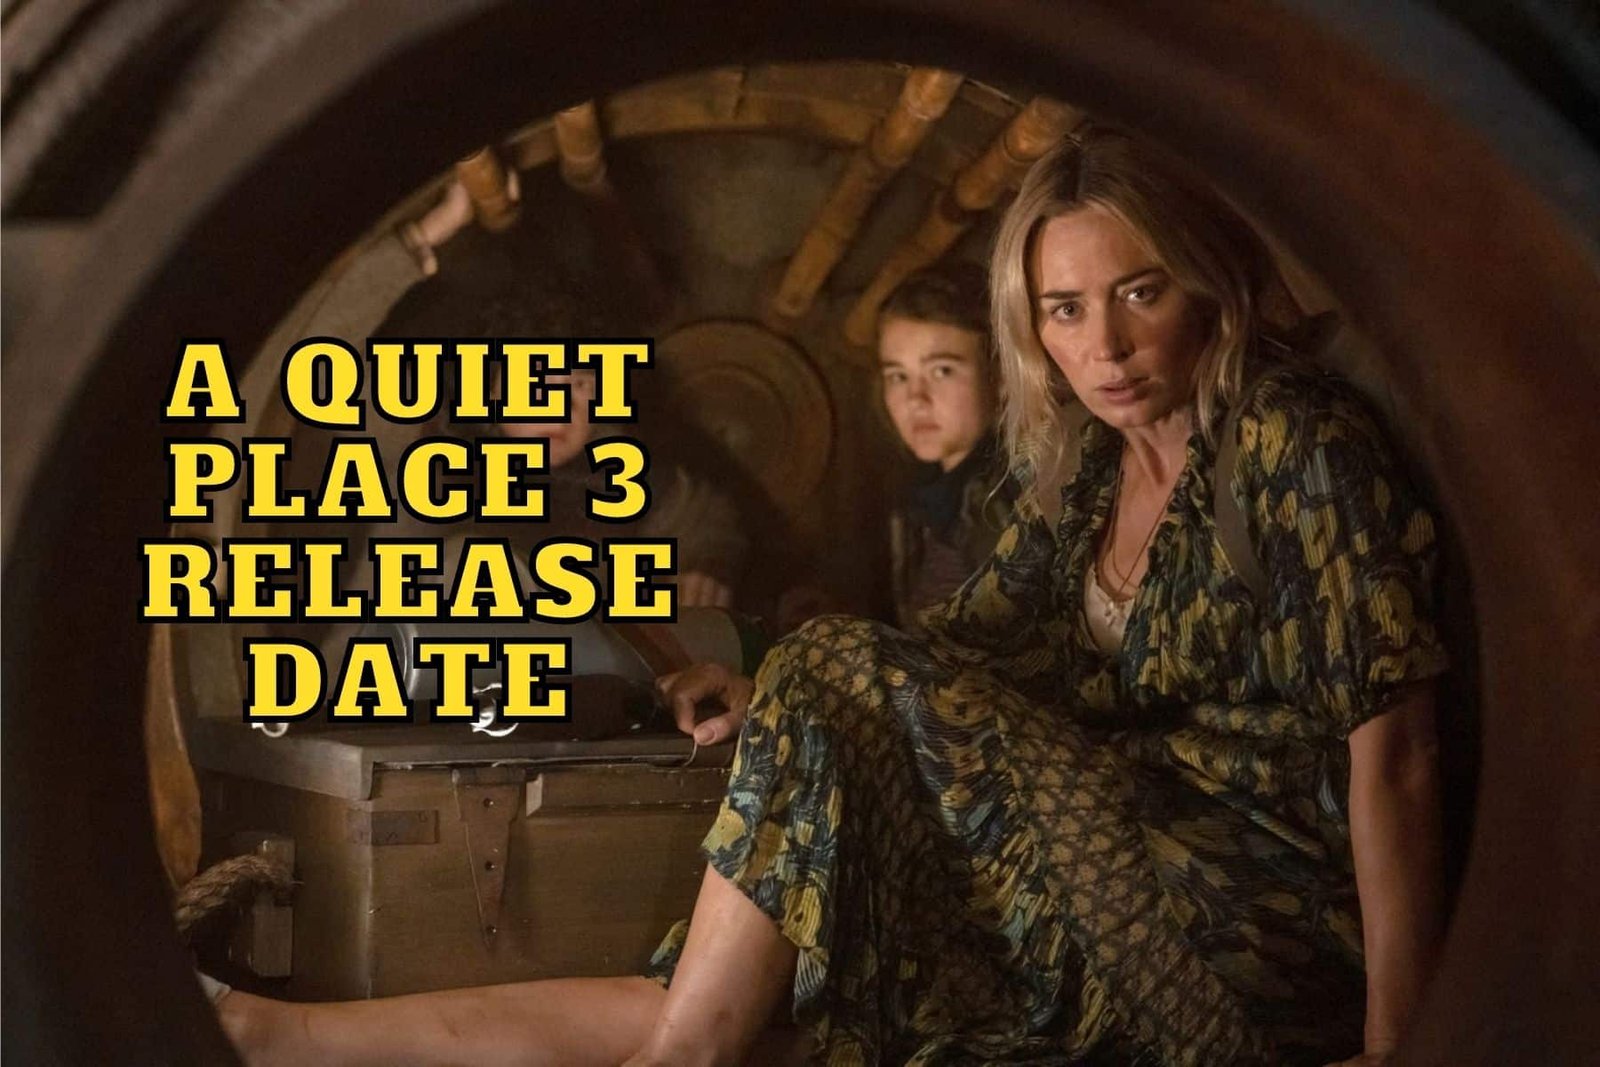 A Quiet Place 3 Release Date, Trailer - Is it Canceled?